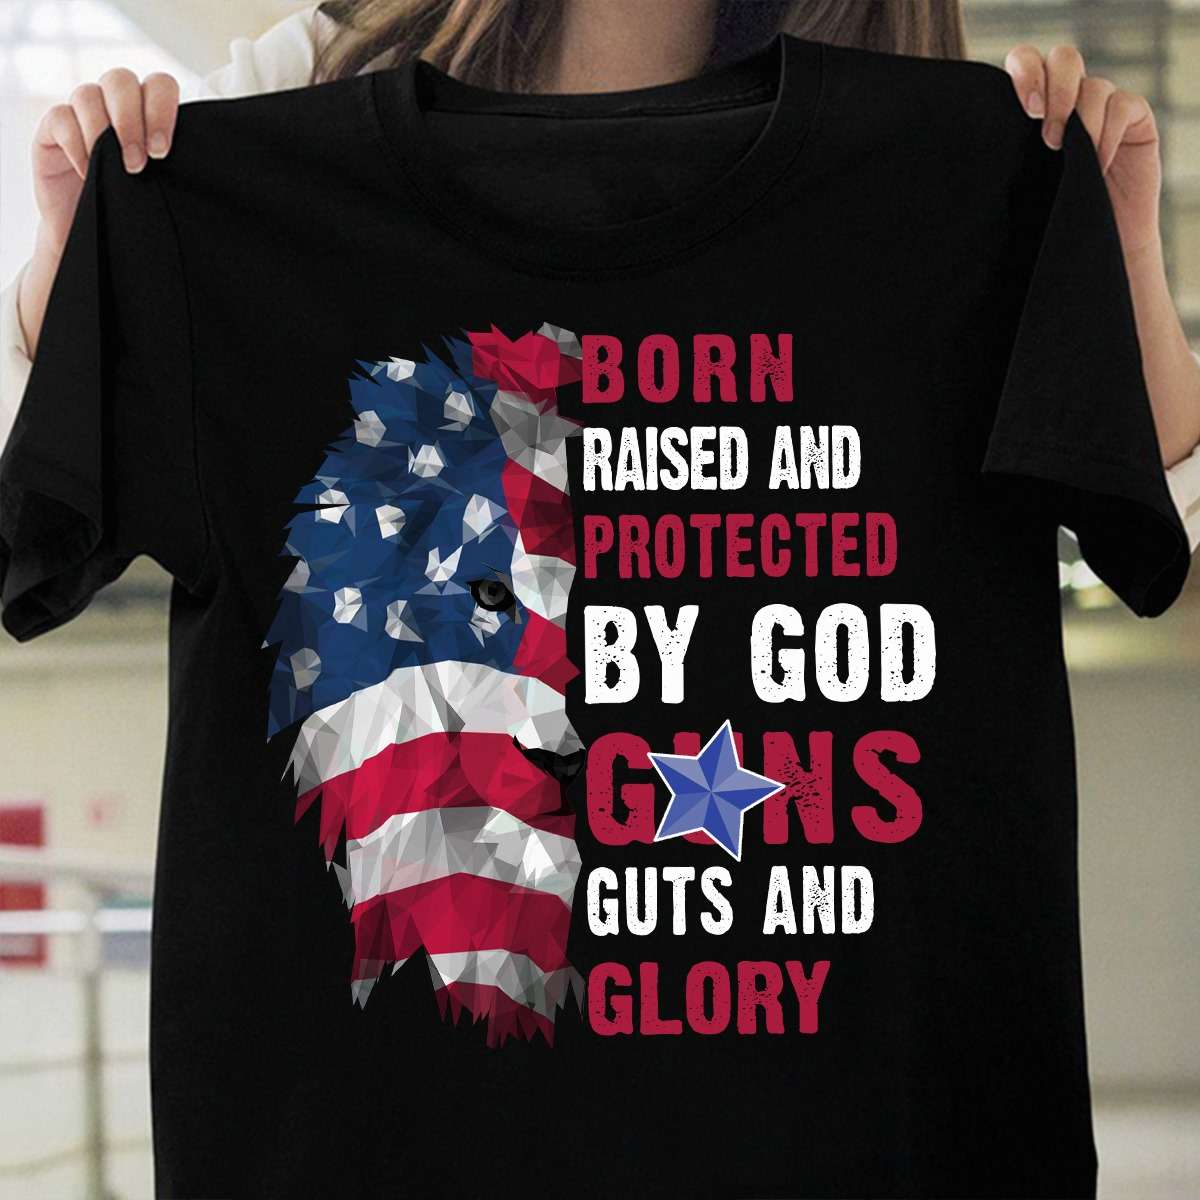 Born raised and protected by god, guns guts and glory - America lion flag